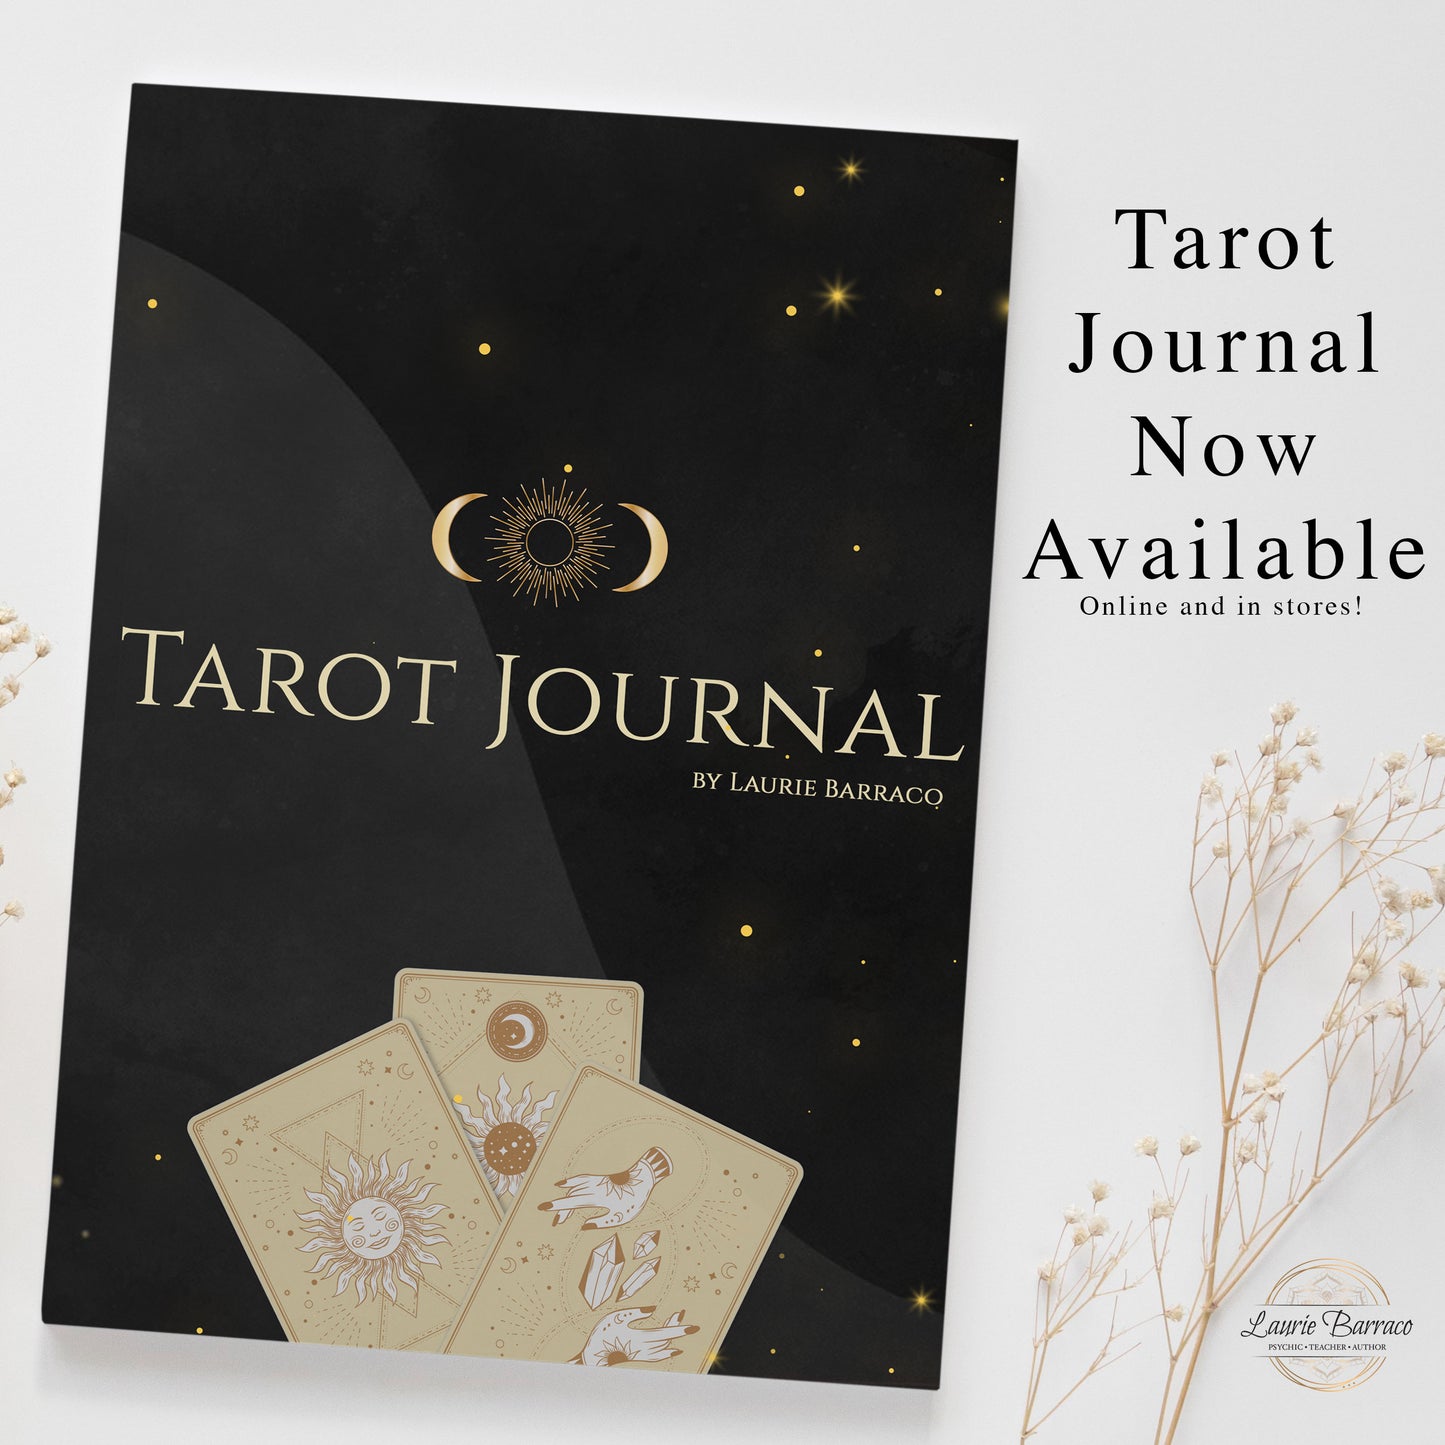 Tarot Journal by Laurie Barraco